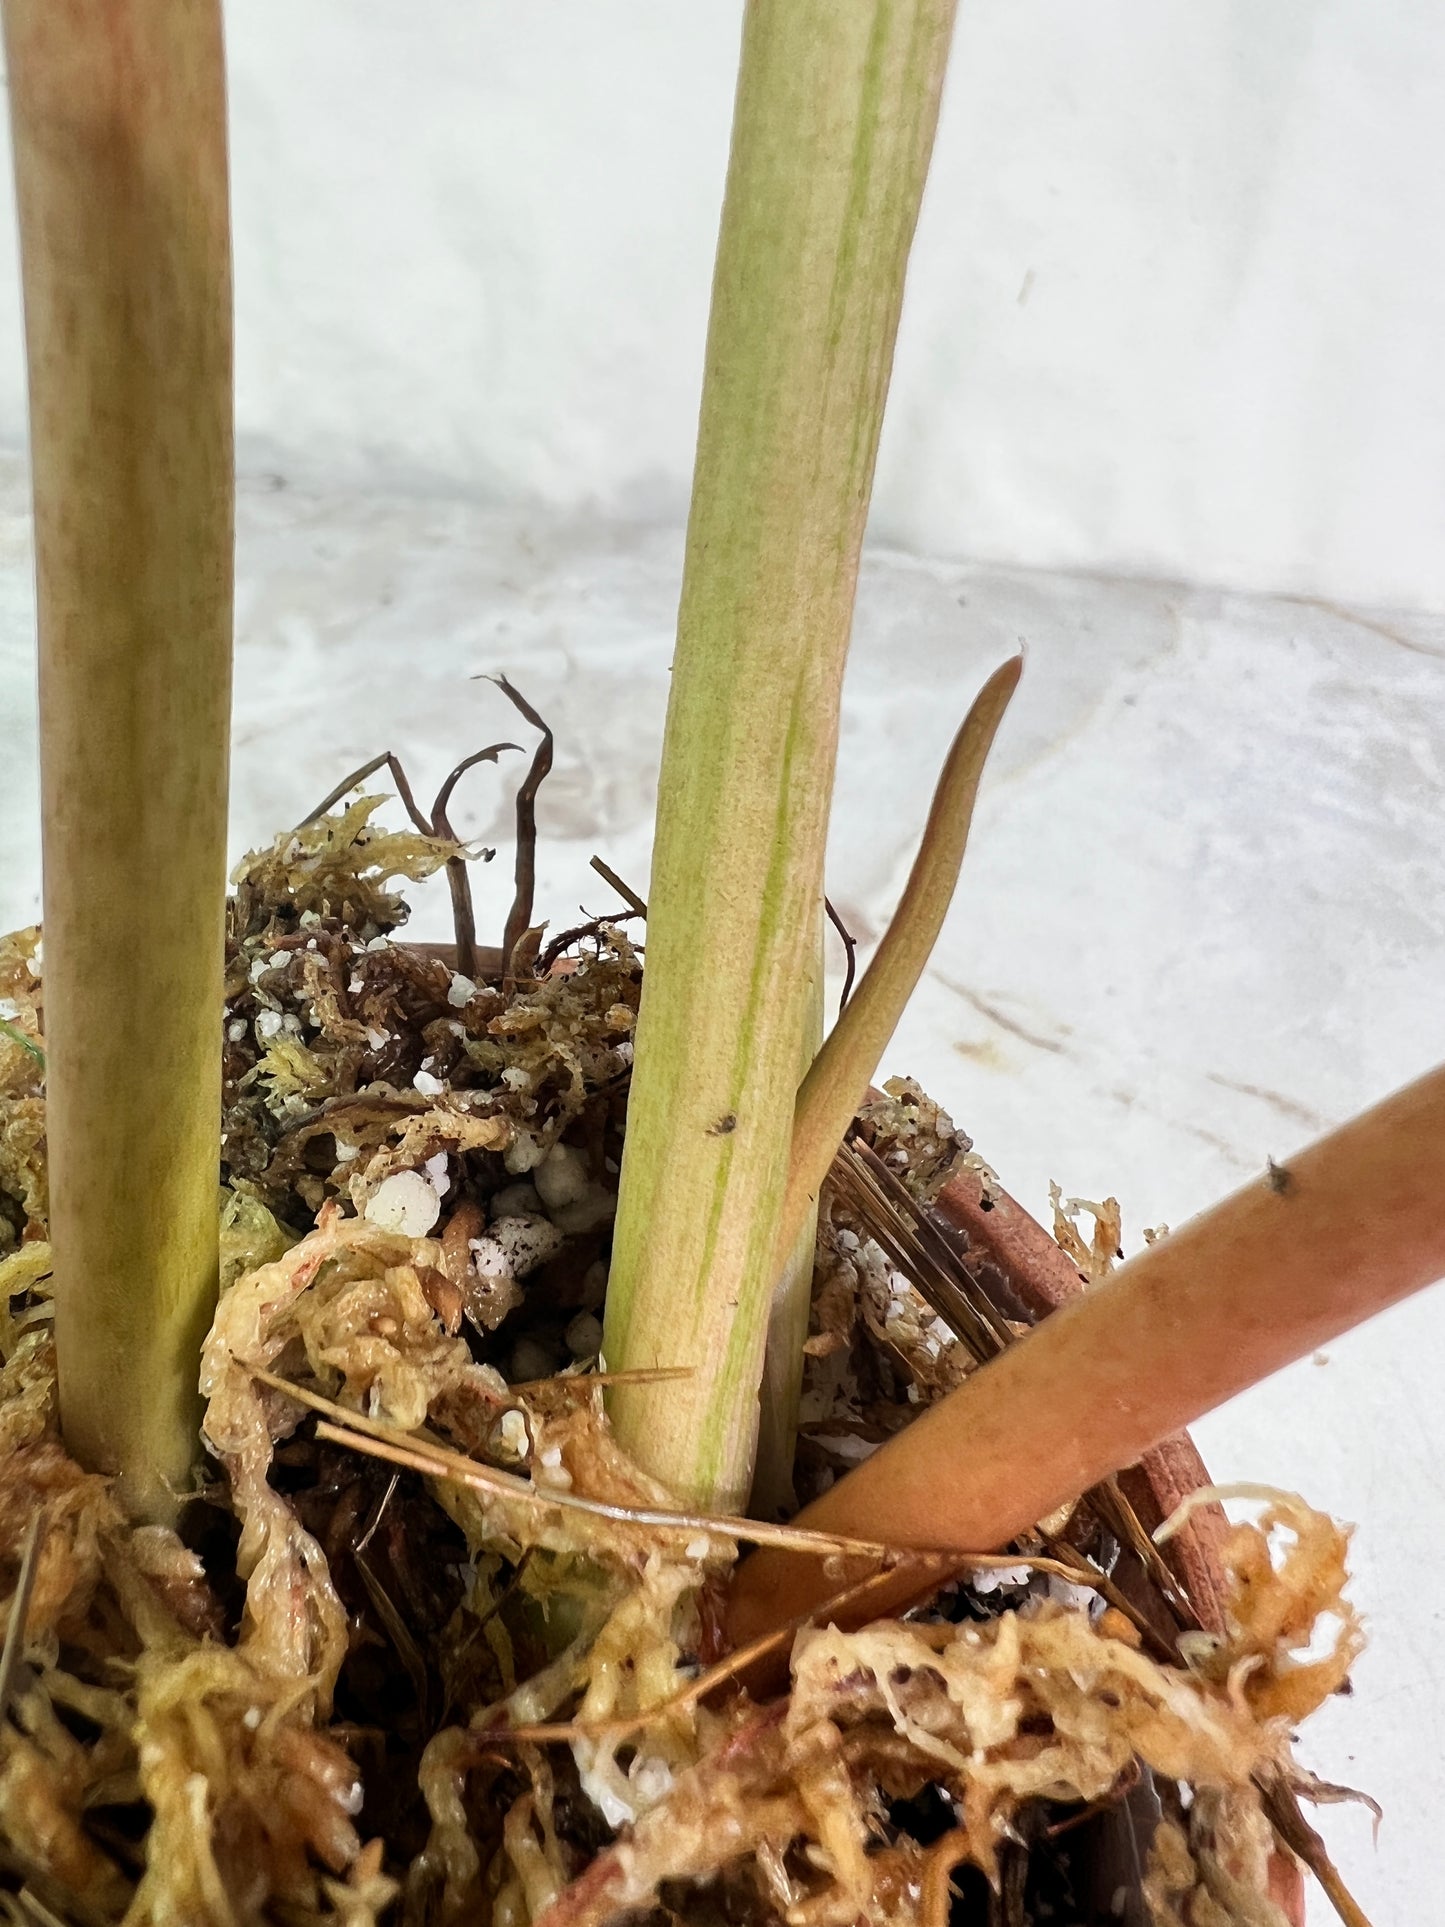 Philodendron snowdrifts rooting in soil 2 leaves (9.5” long) 1 sprout top cutting